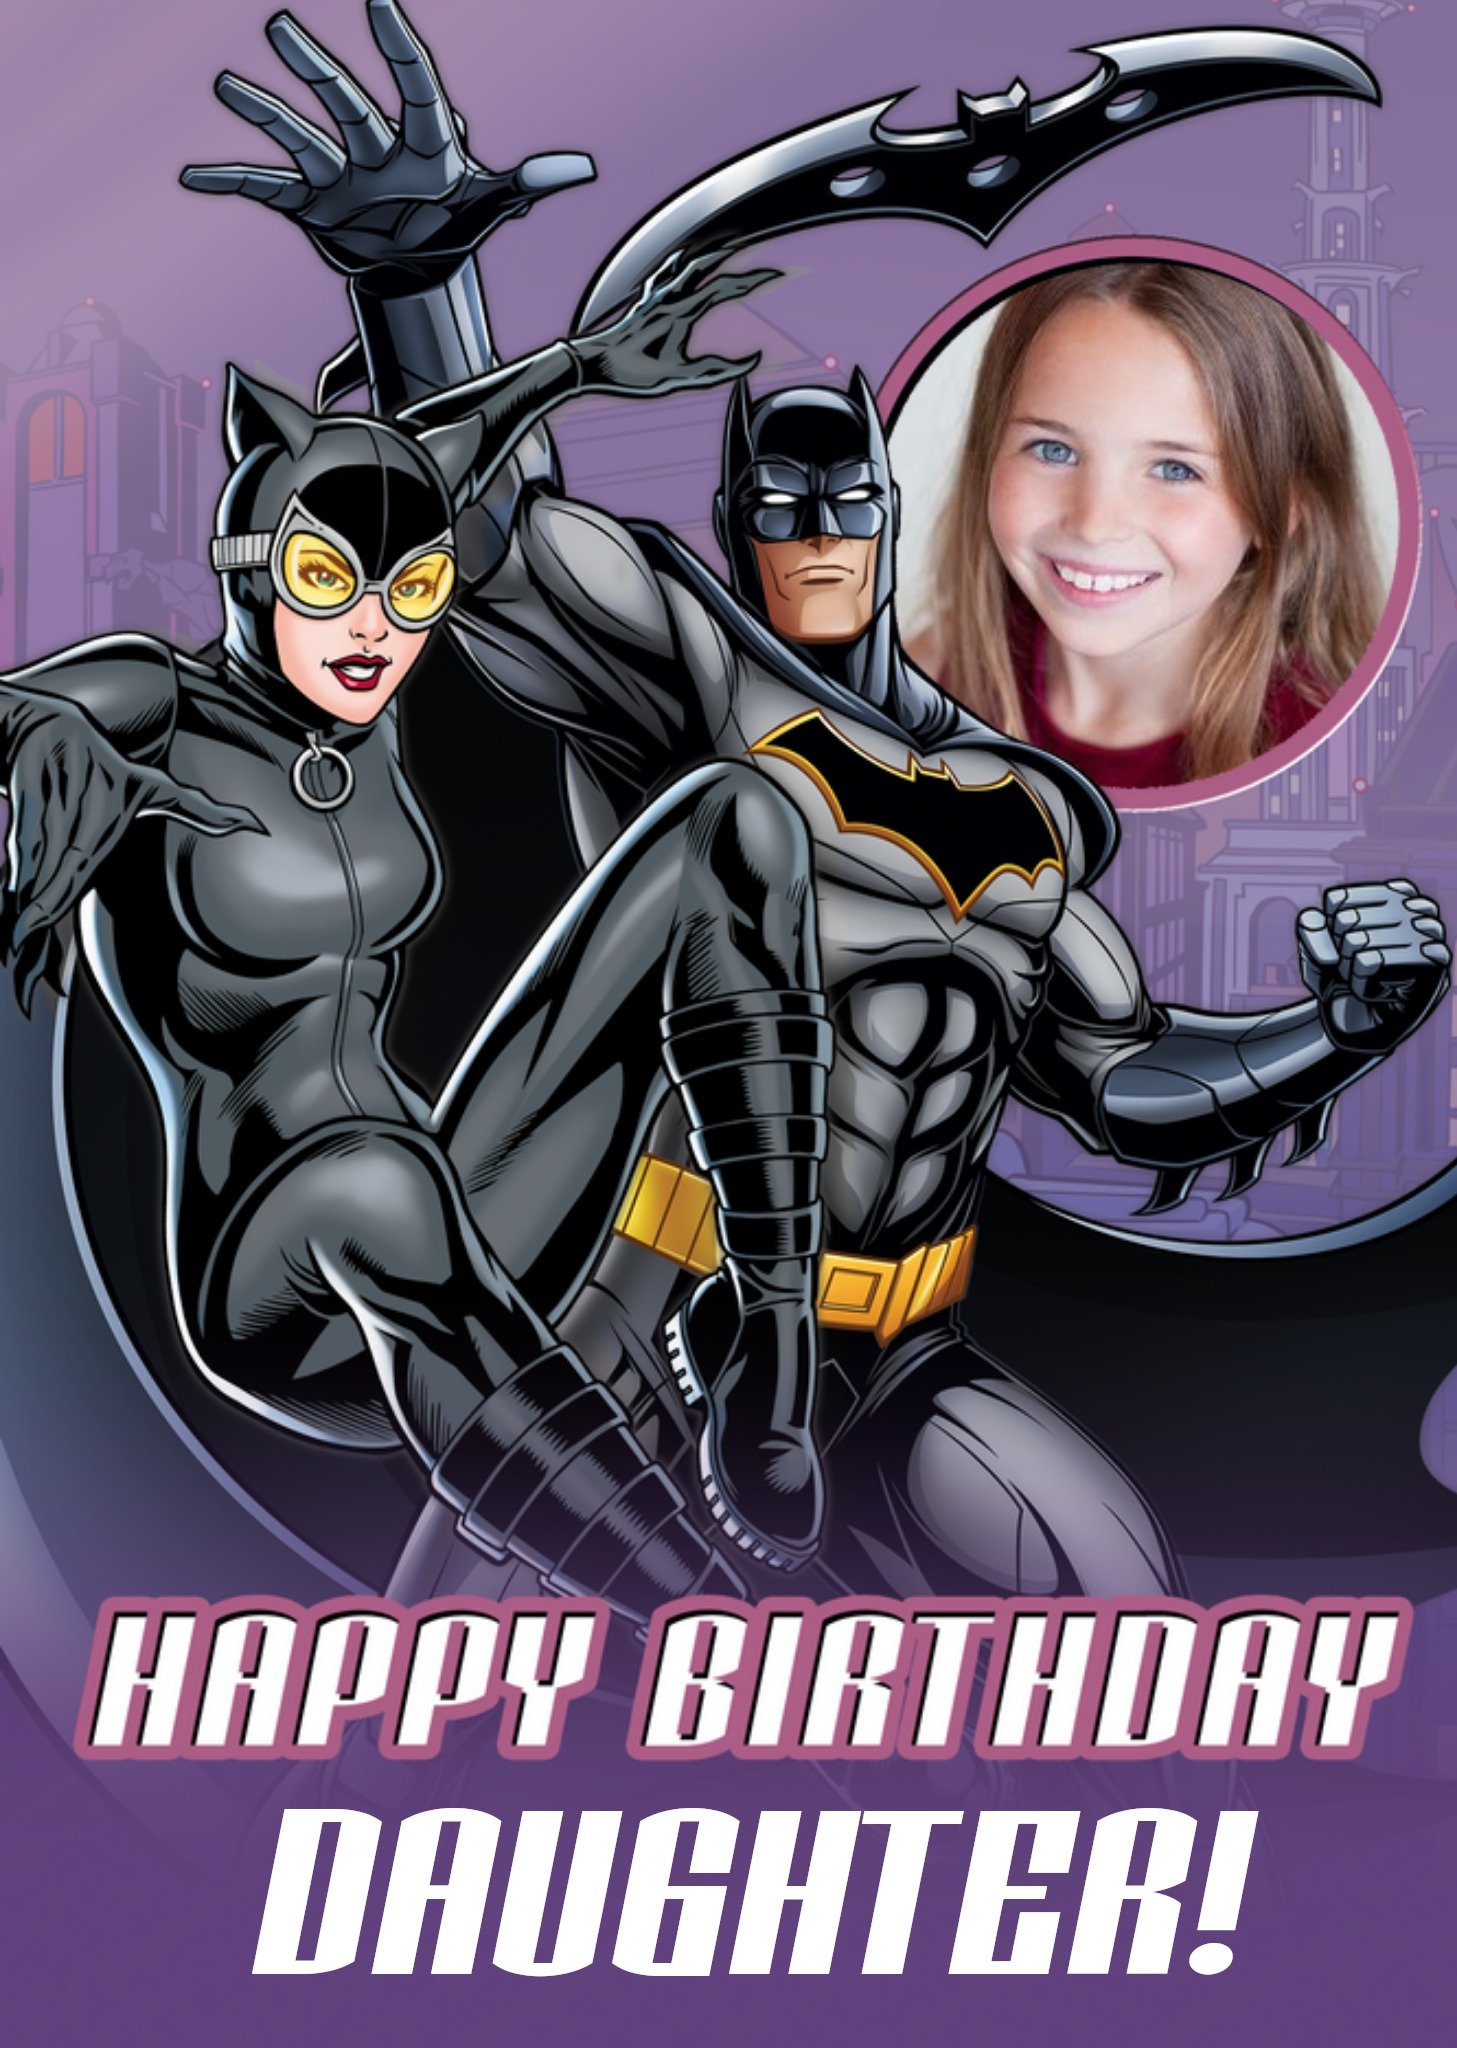 Illustrated Batman And Catwoman Photo Upload Daughter Birthday Card, Large